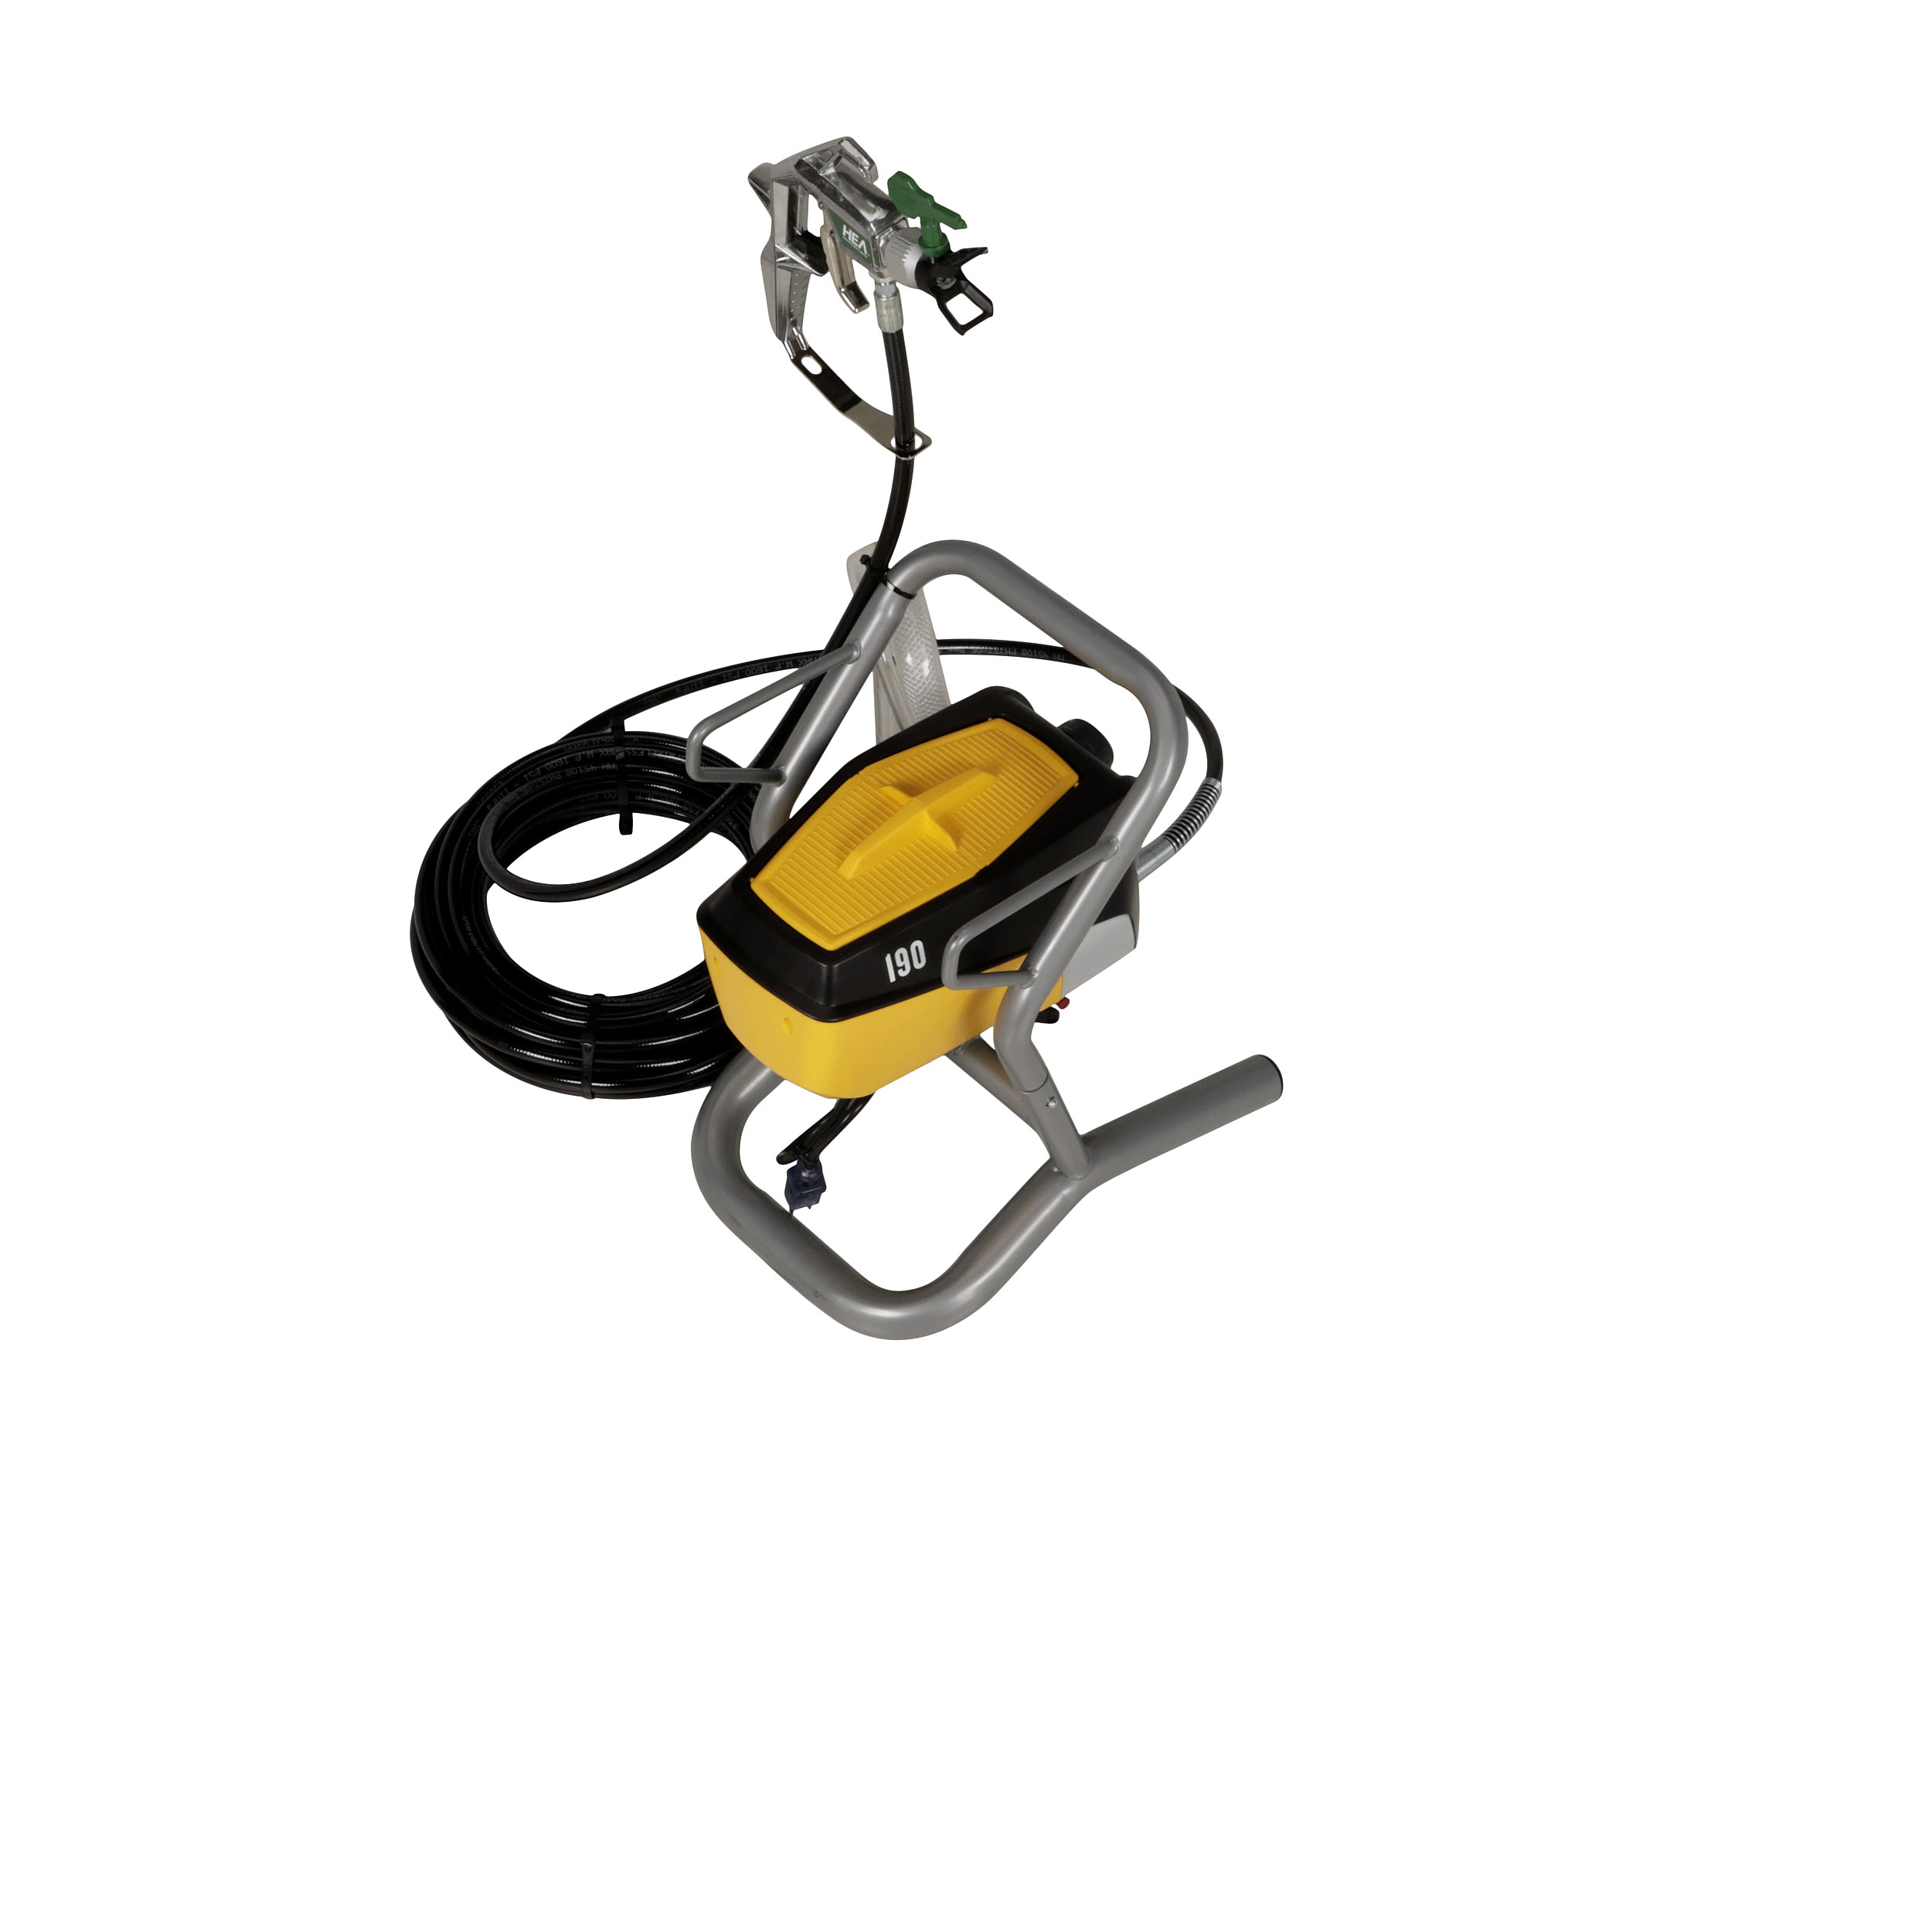 Wagner Control Pro 190 Cart Airless Sprayer — Includes 50ft. Hose, Model#  0580559